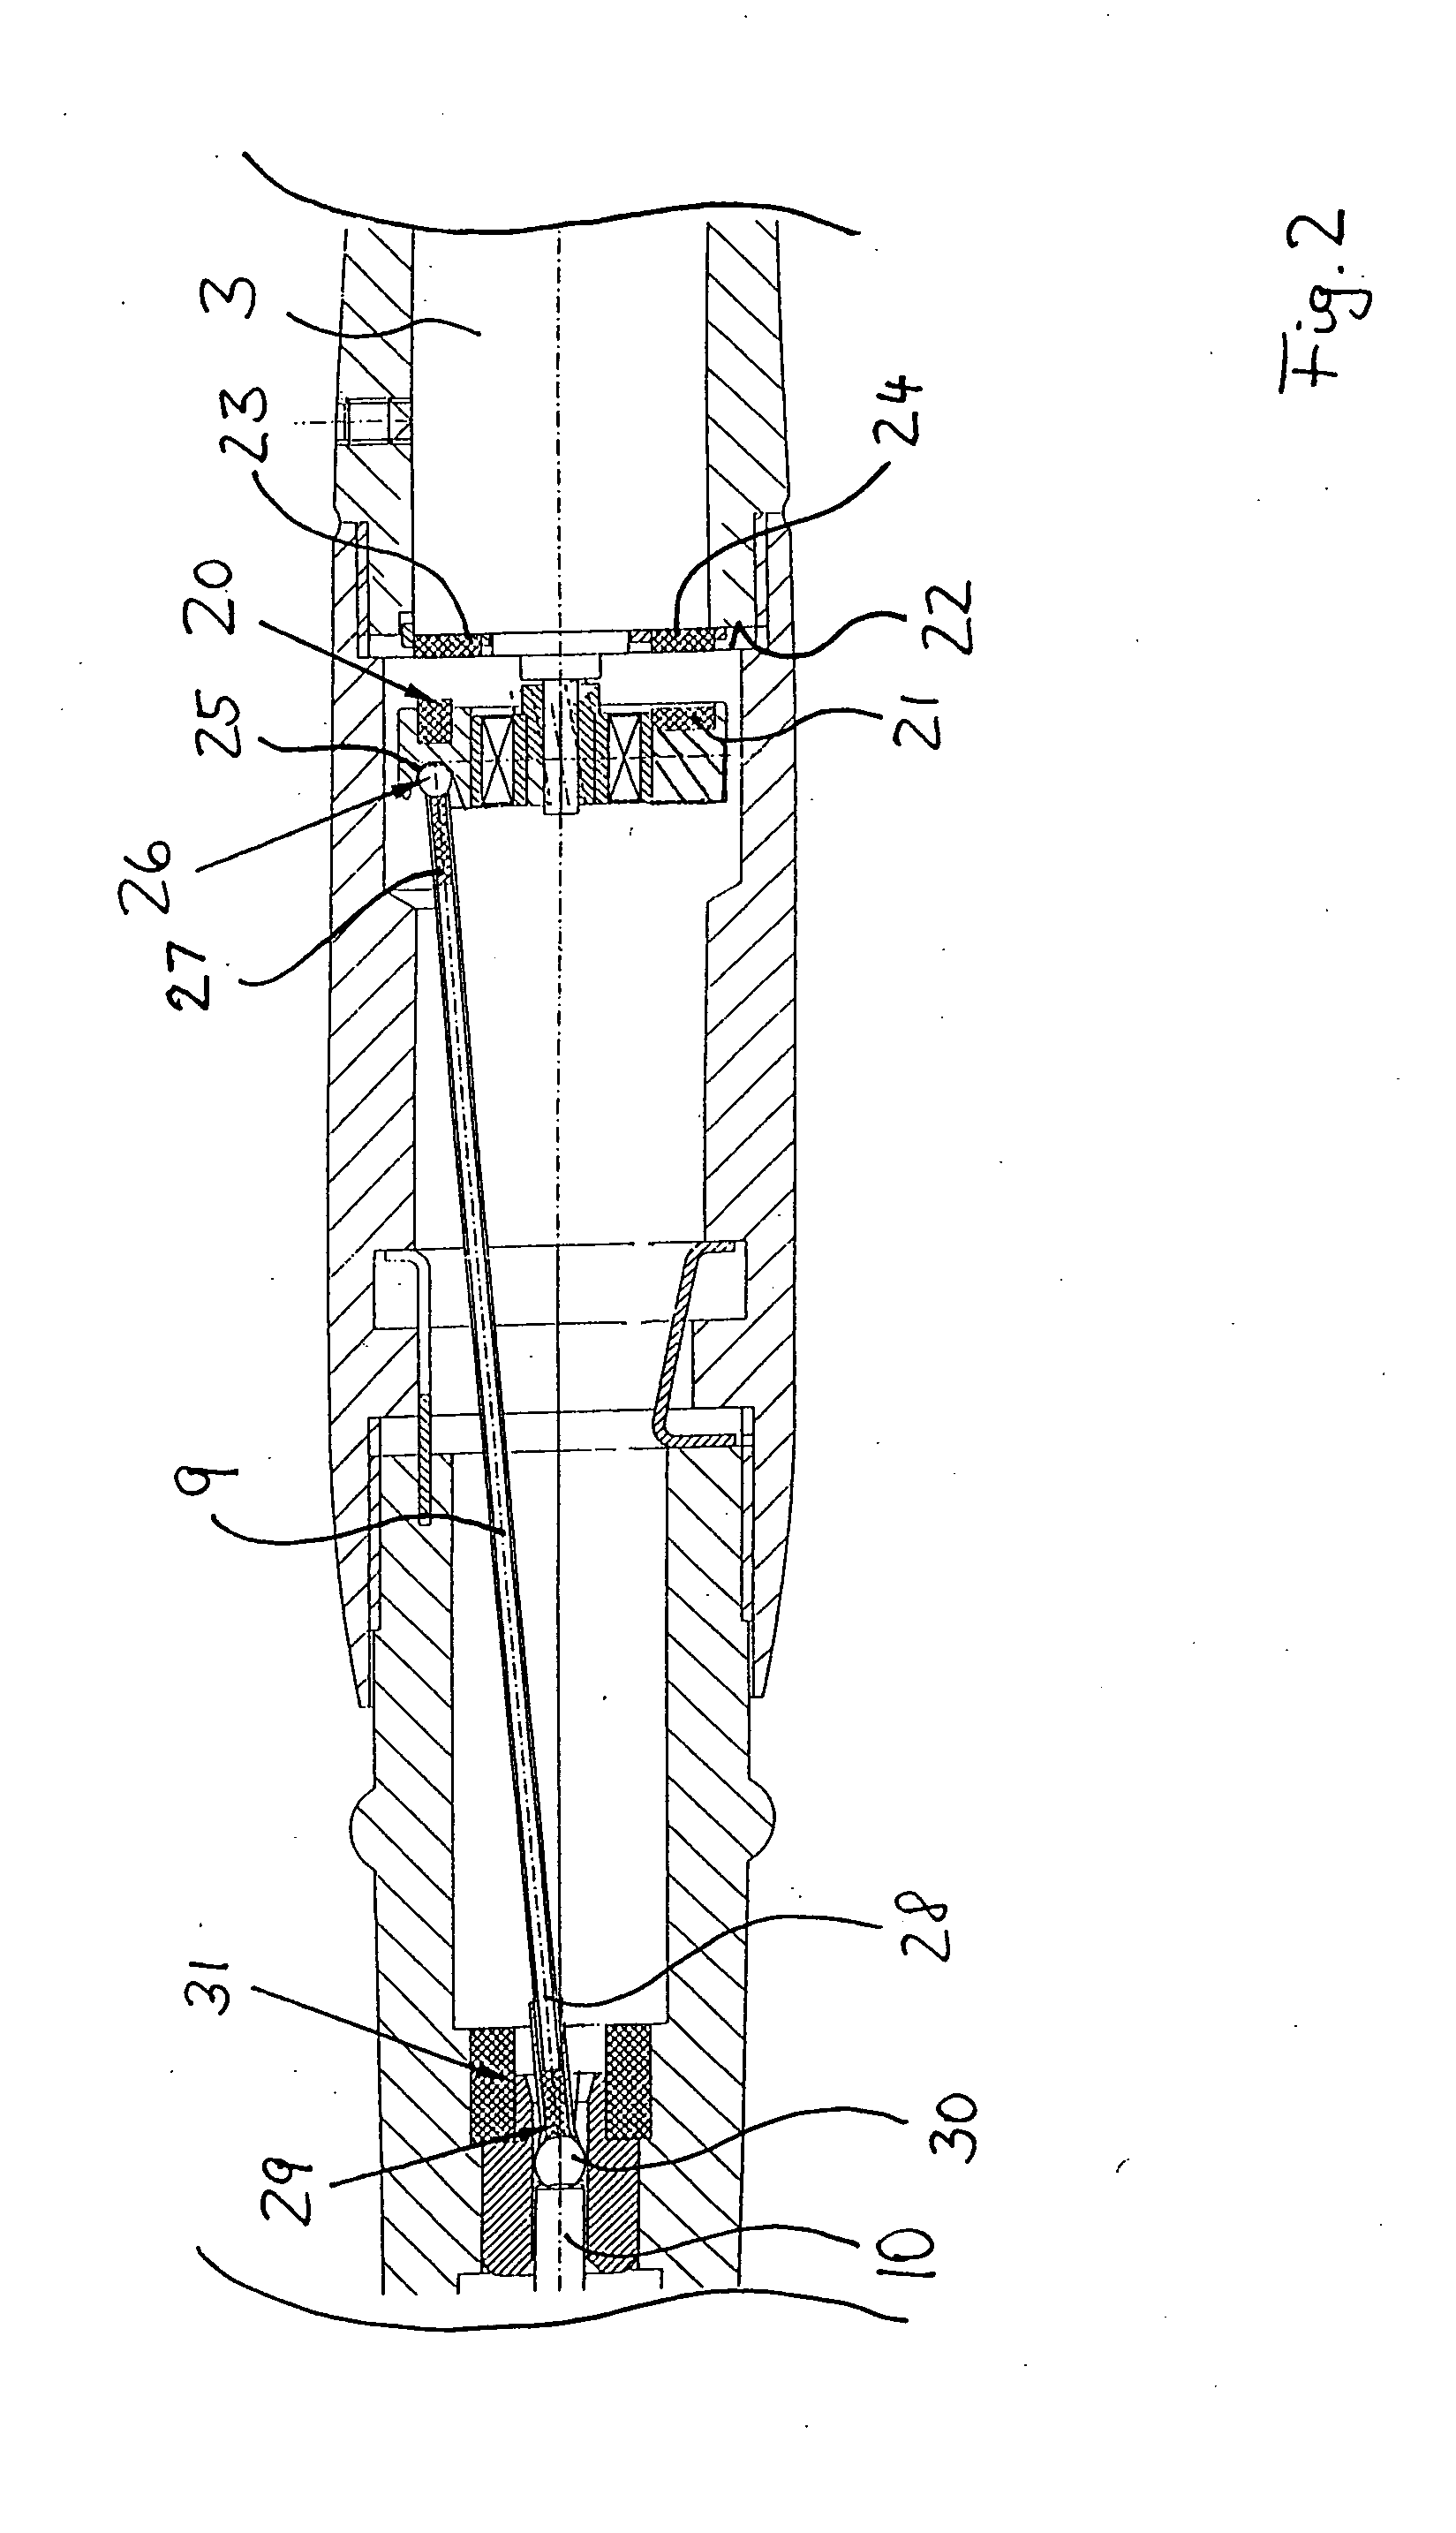 Drive module for a device for the local piercing of a human or animal skin and a handheld